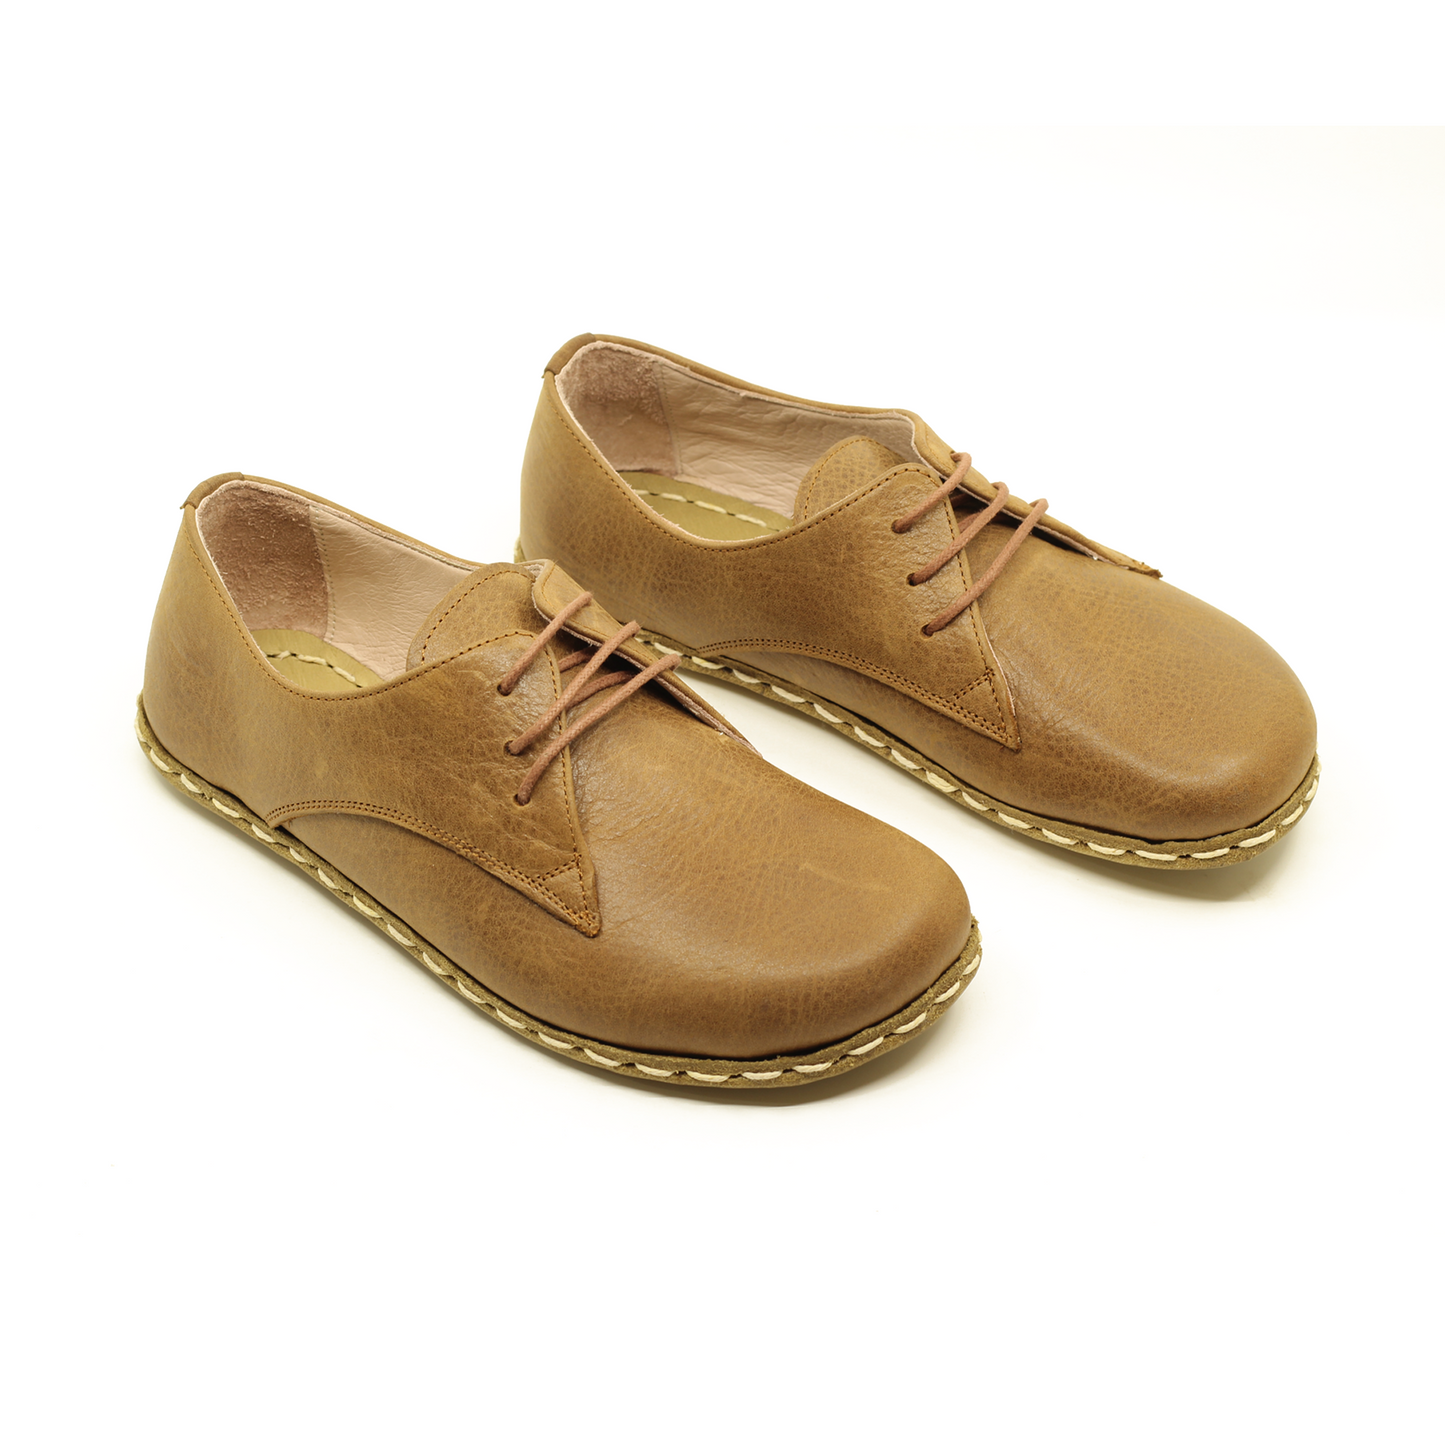 Experience Optimal Foot Health with Handmade Zero Drop Shoes for Women in Genuine Matte Brown Leather